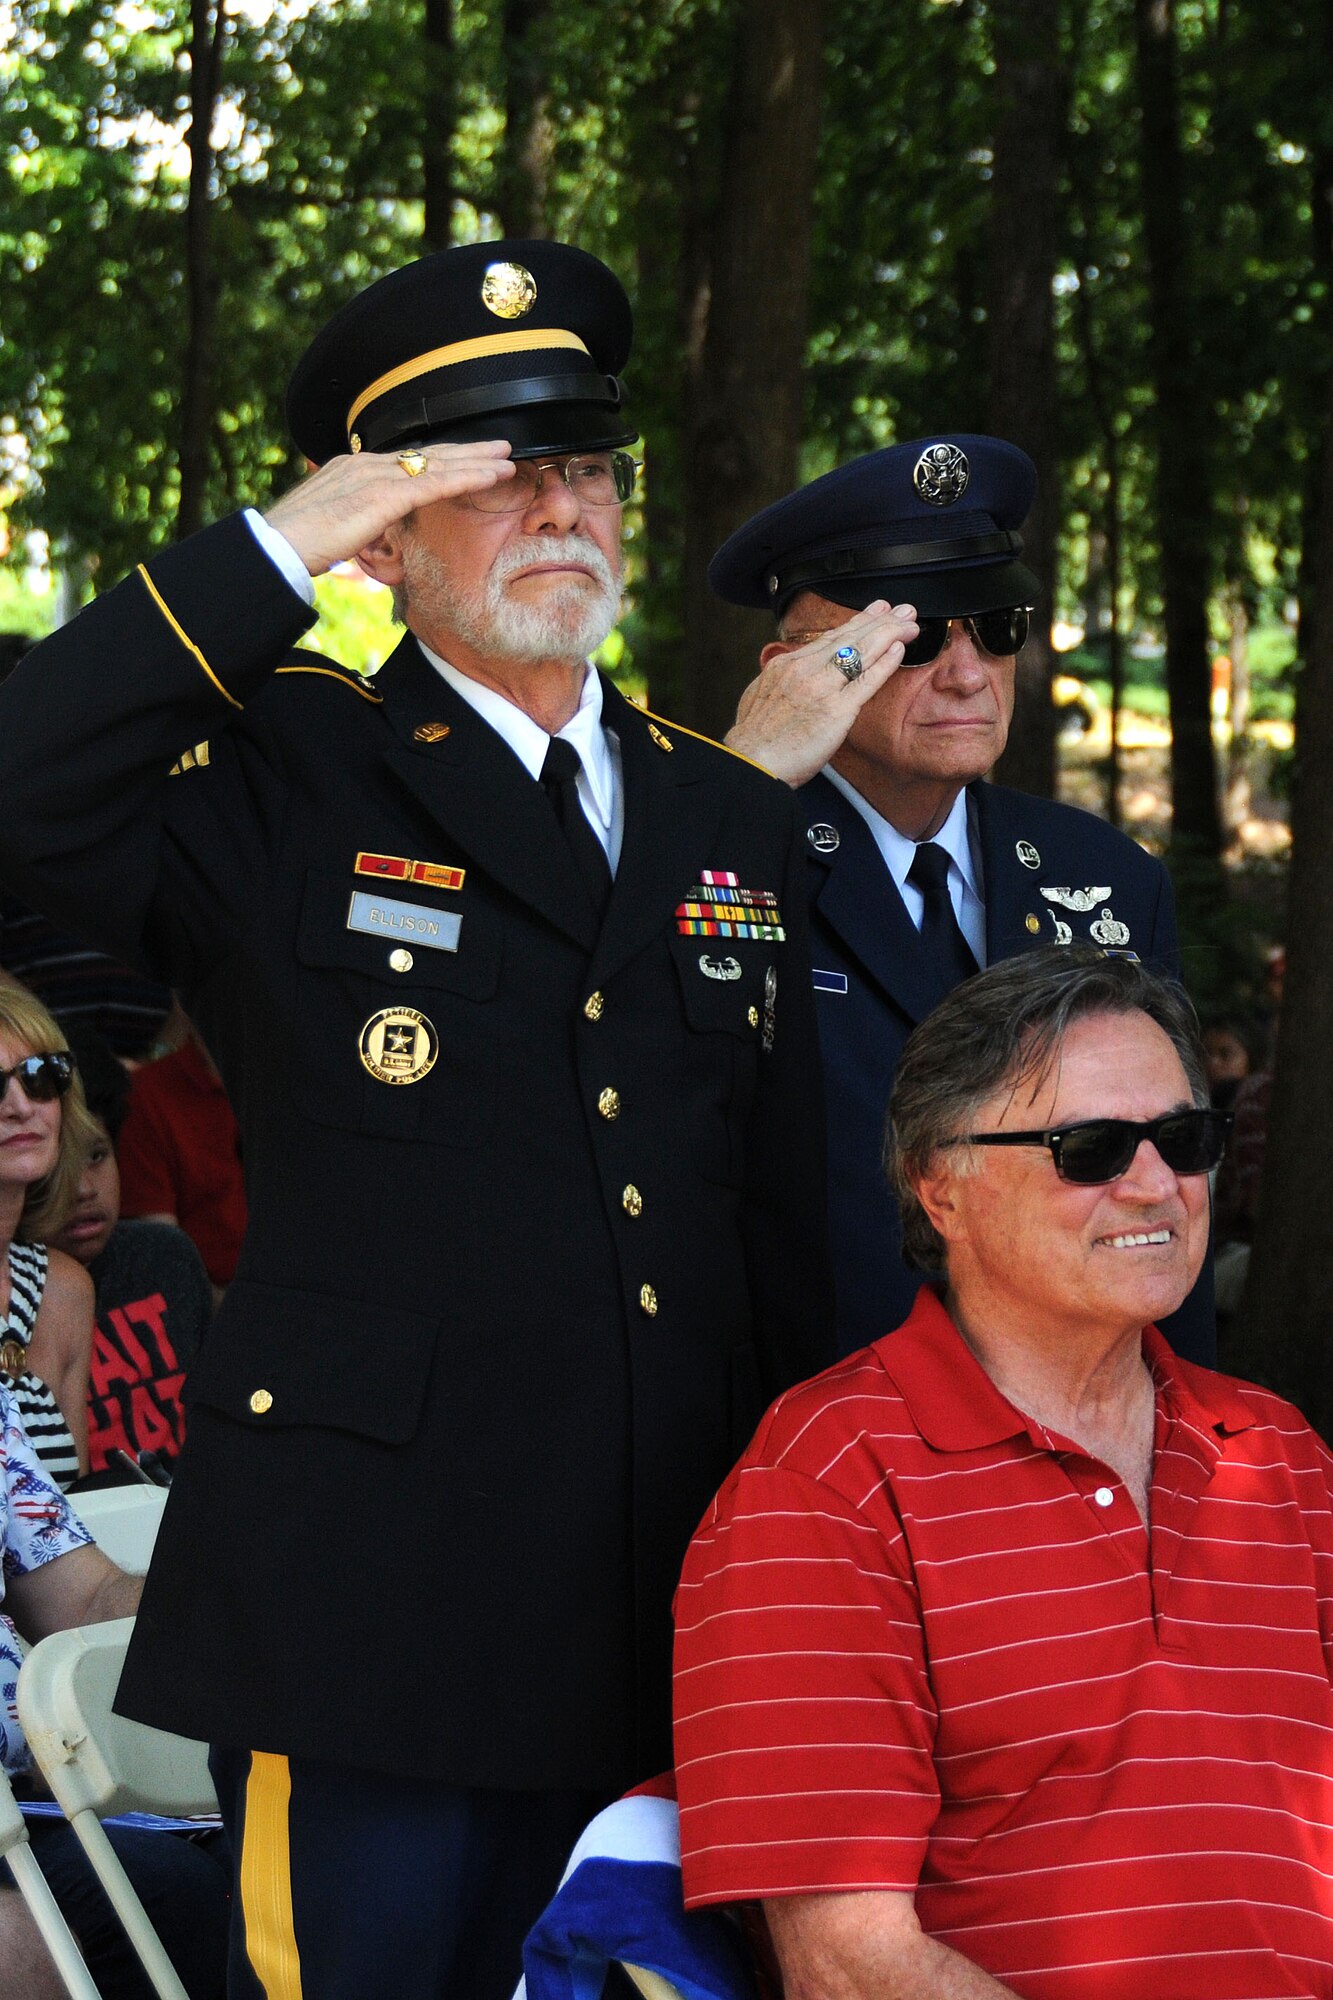 Retired service members salute during the Roswell Memorial Day Ceremony at Roswell City Hall area, Roswell, GA on May 27, 2019. The event is held annually. The theme and objective of the program is to honor the sacrifice and memory of the fallen military throughout history who fought to gain and preserve the freedoms enjoyed in the United States.  (U.S. Air Force photo by Senior Airman Justin Clayvon)